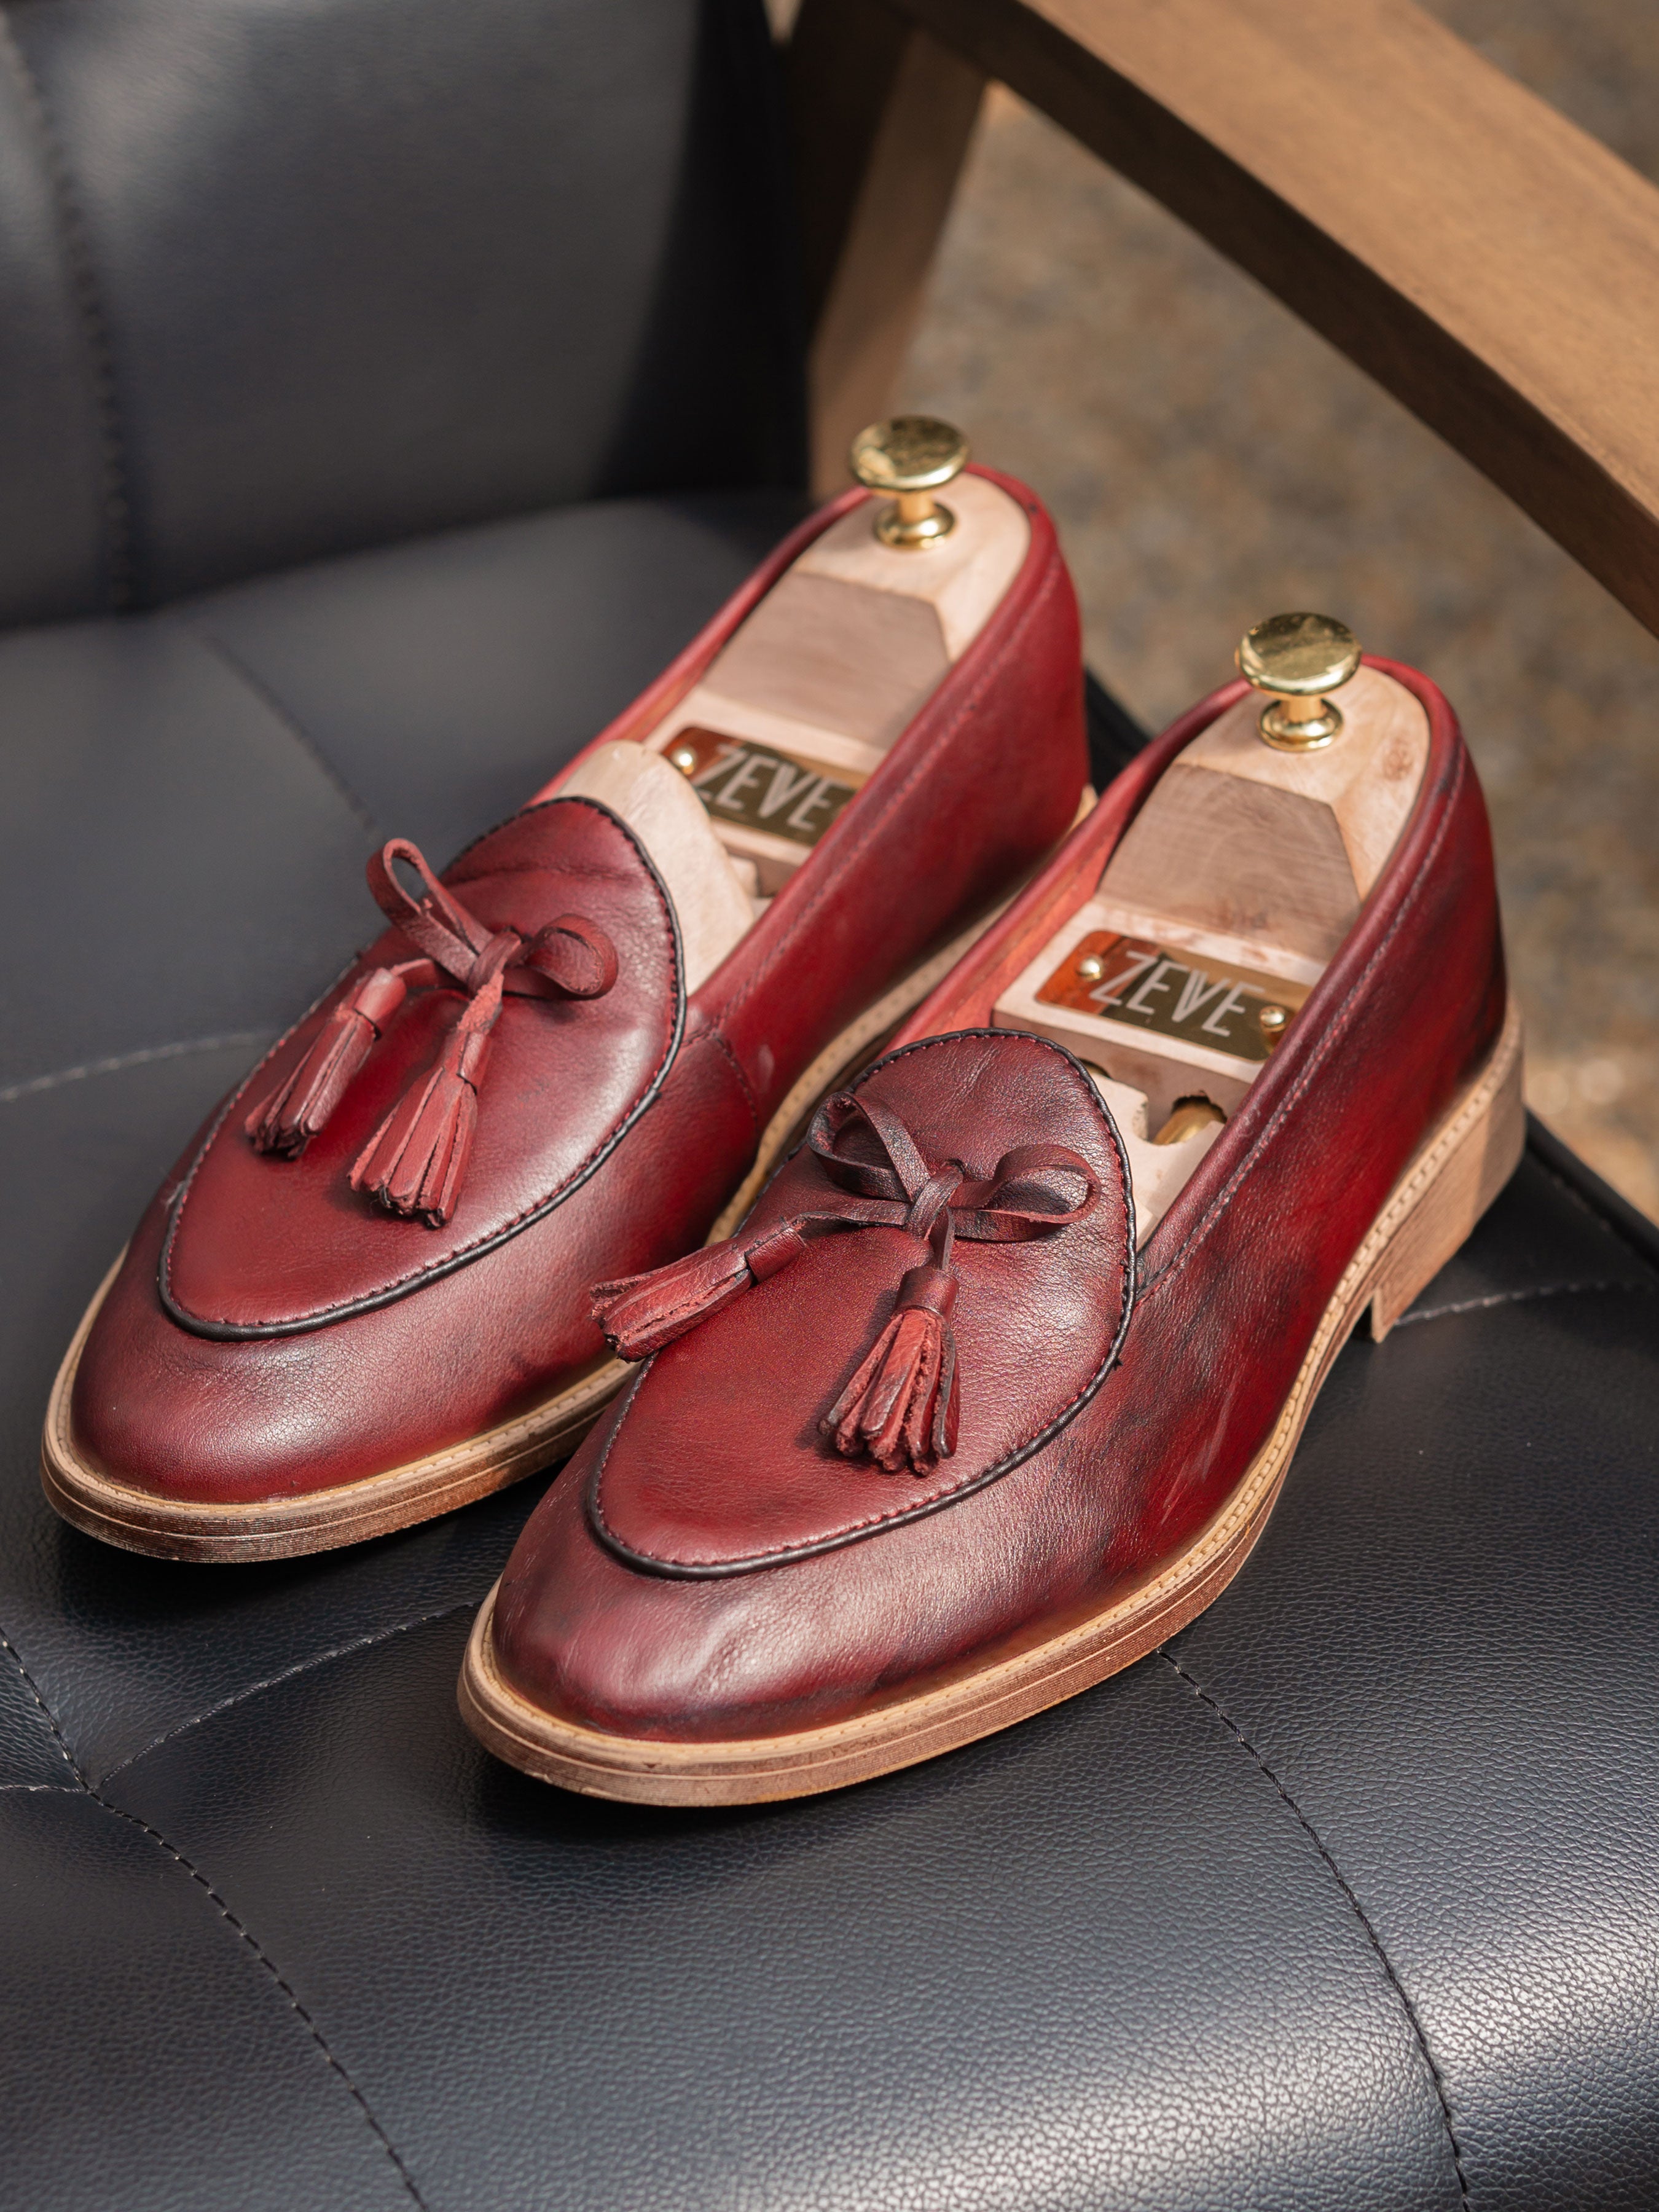 Belgian Loafer with Ribbon Tassel - Red Burgundy Leather (Flexi-Sole) - Zeve Shoes